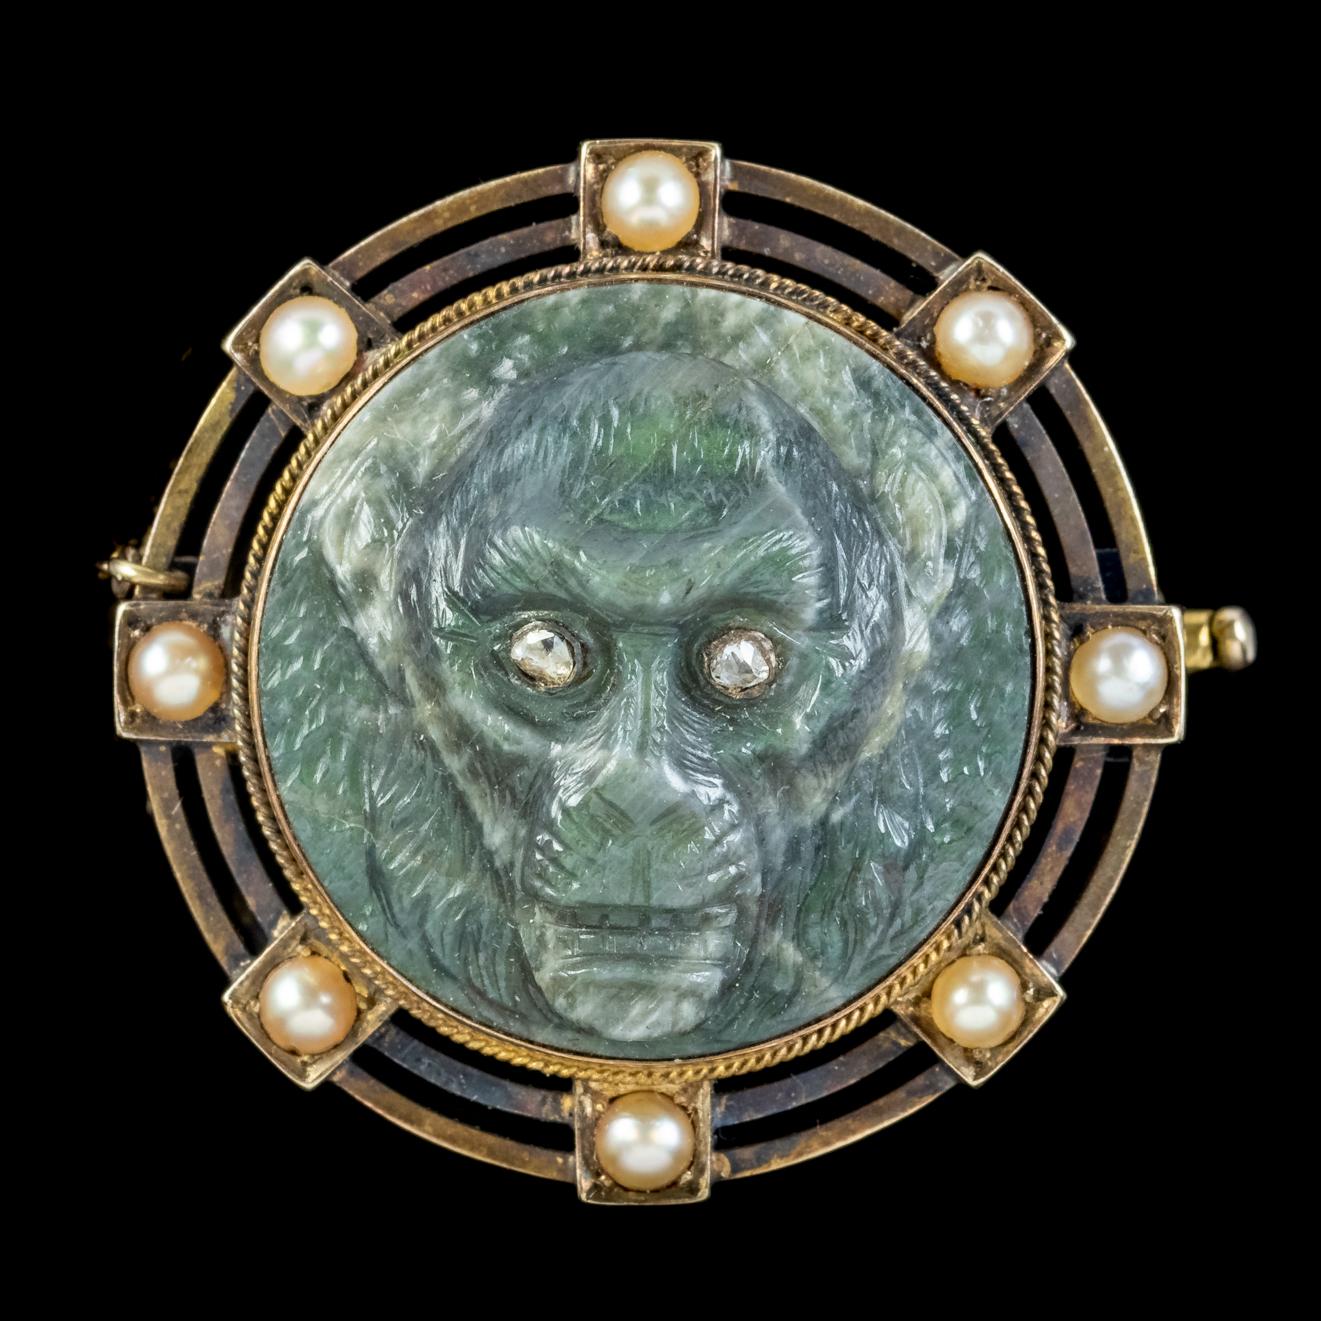 A fascinating Antique mid Victorian brooch featuring a wonderful hand carved Labradorite monkey face set with Rose cut Diamond eyes. The Labradorite is a well-executed carving, with high relief workmanship showing shape and characteristics in the